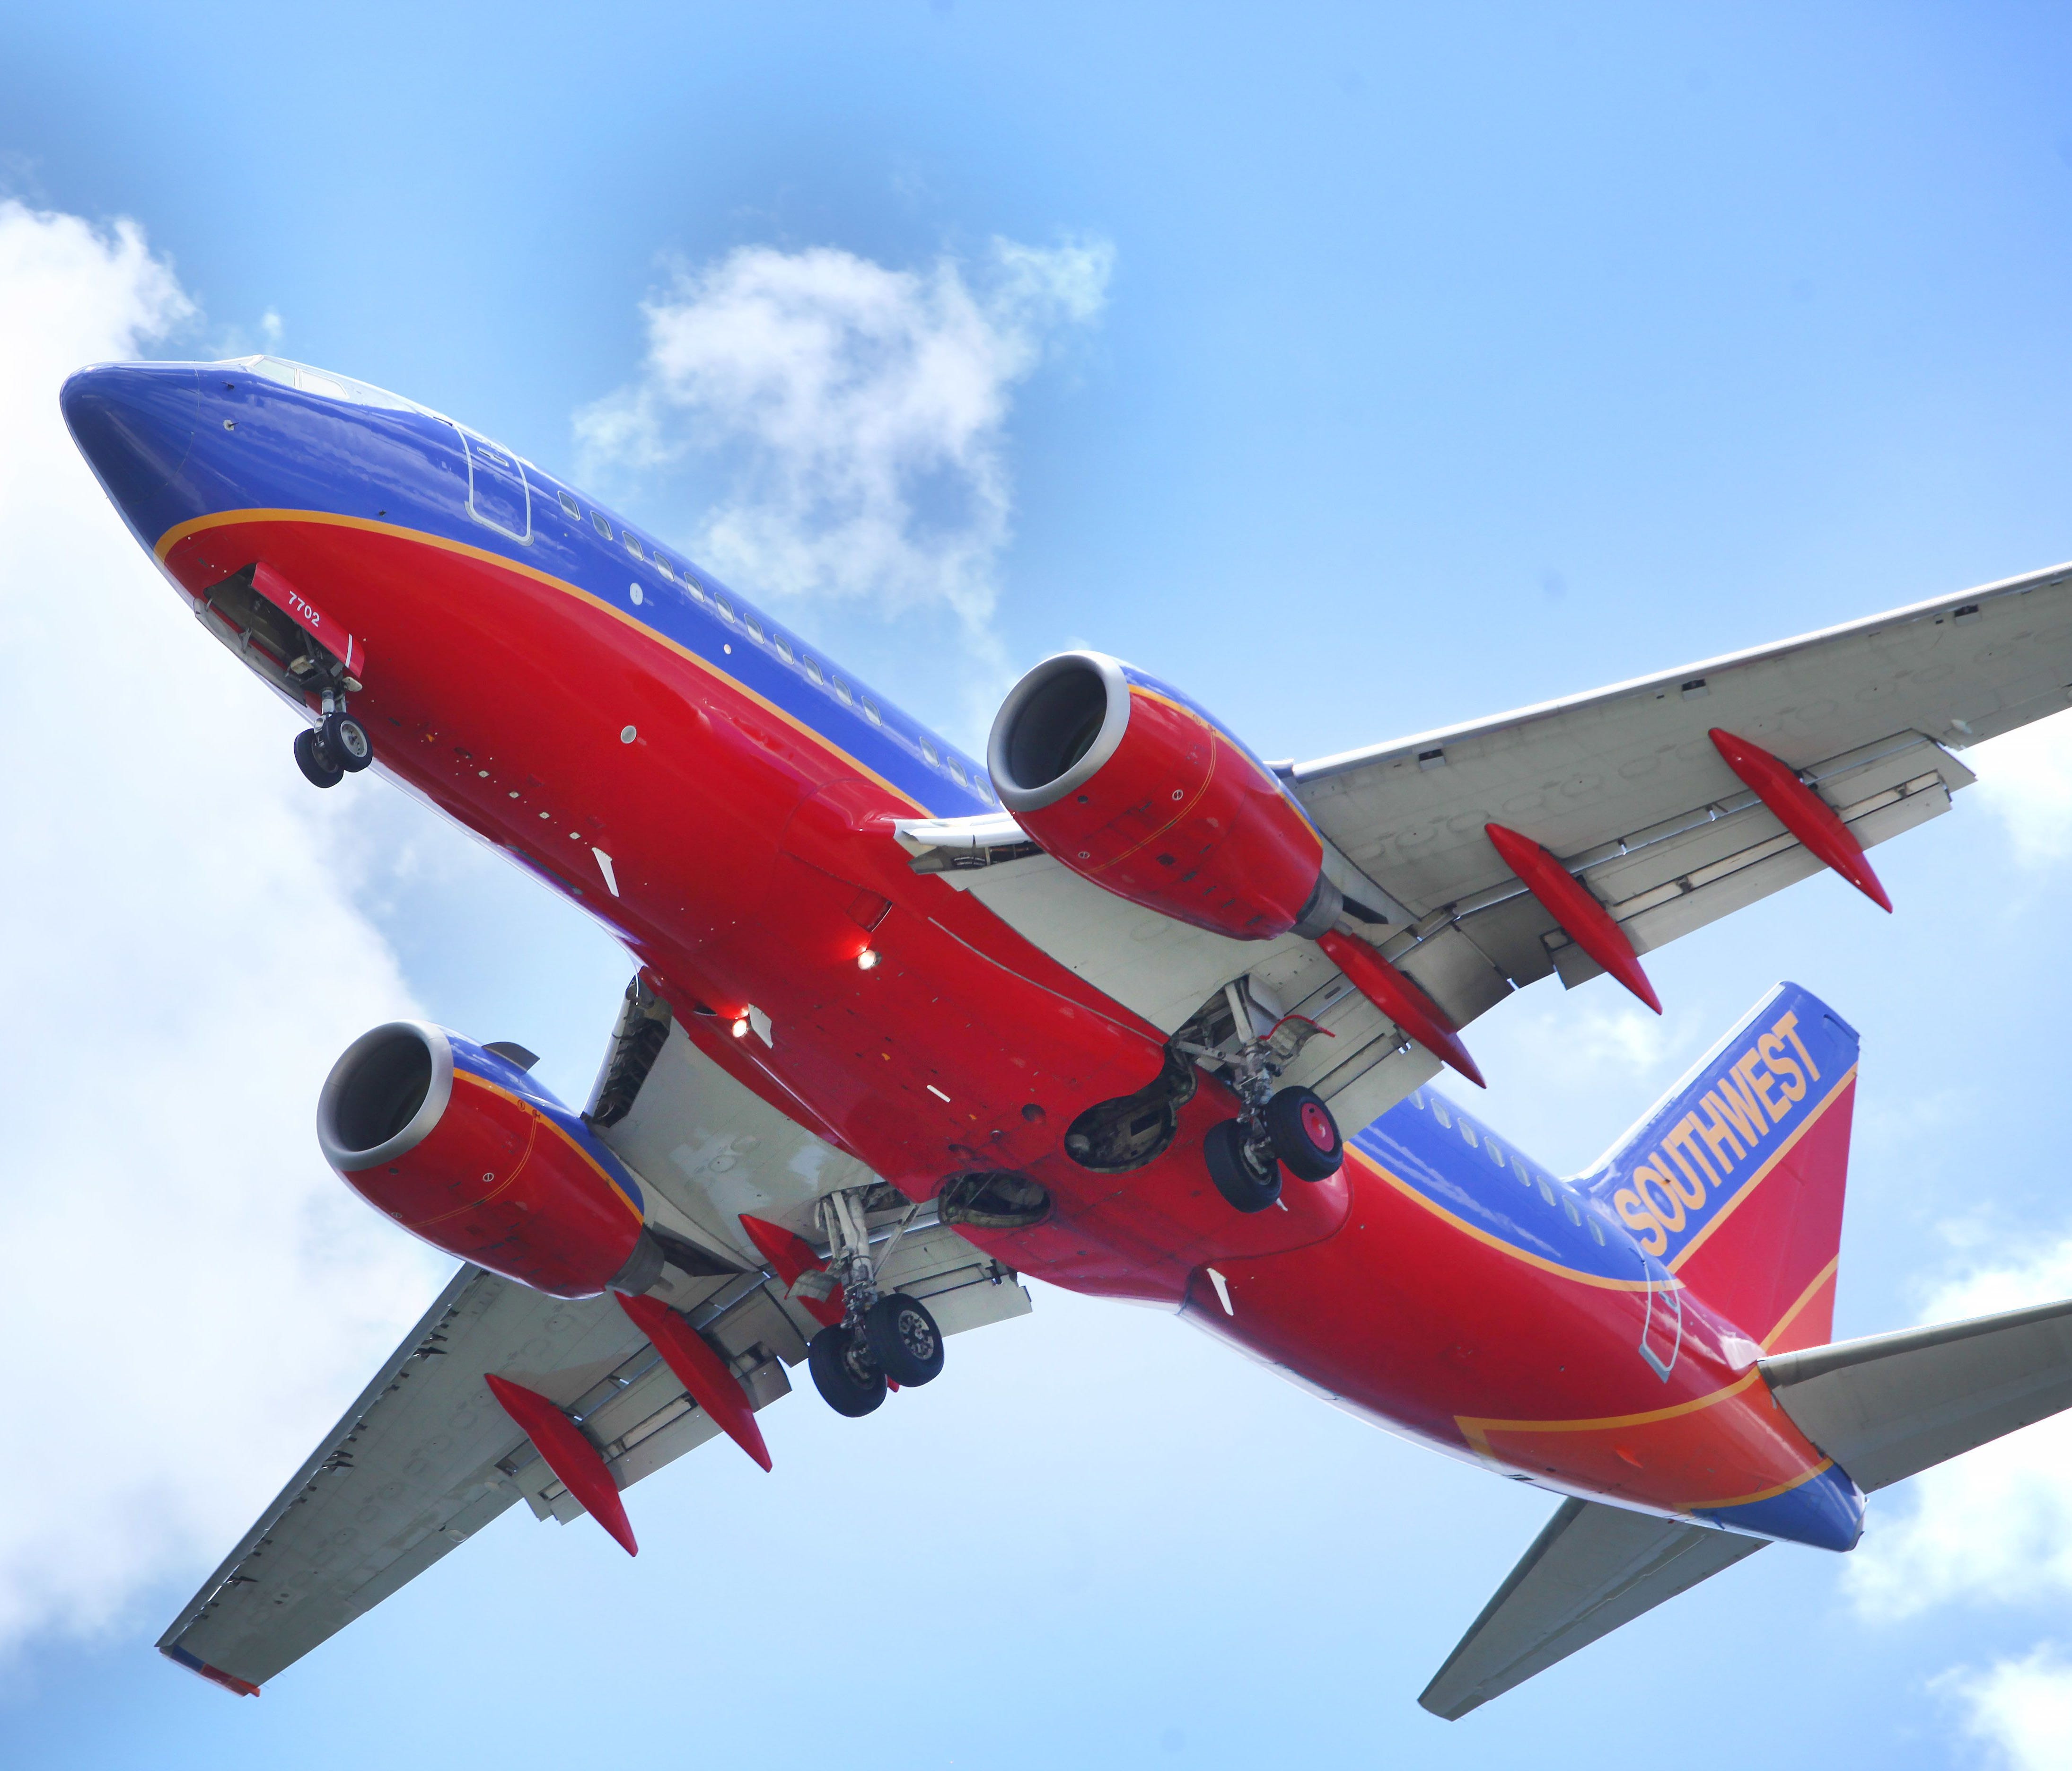 A Southwest Airlines jet gets ready to land at Tampa International Airport on June 6, 2016.